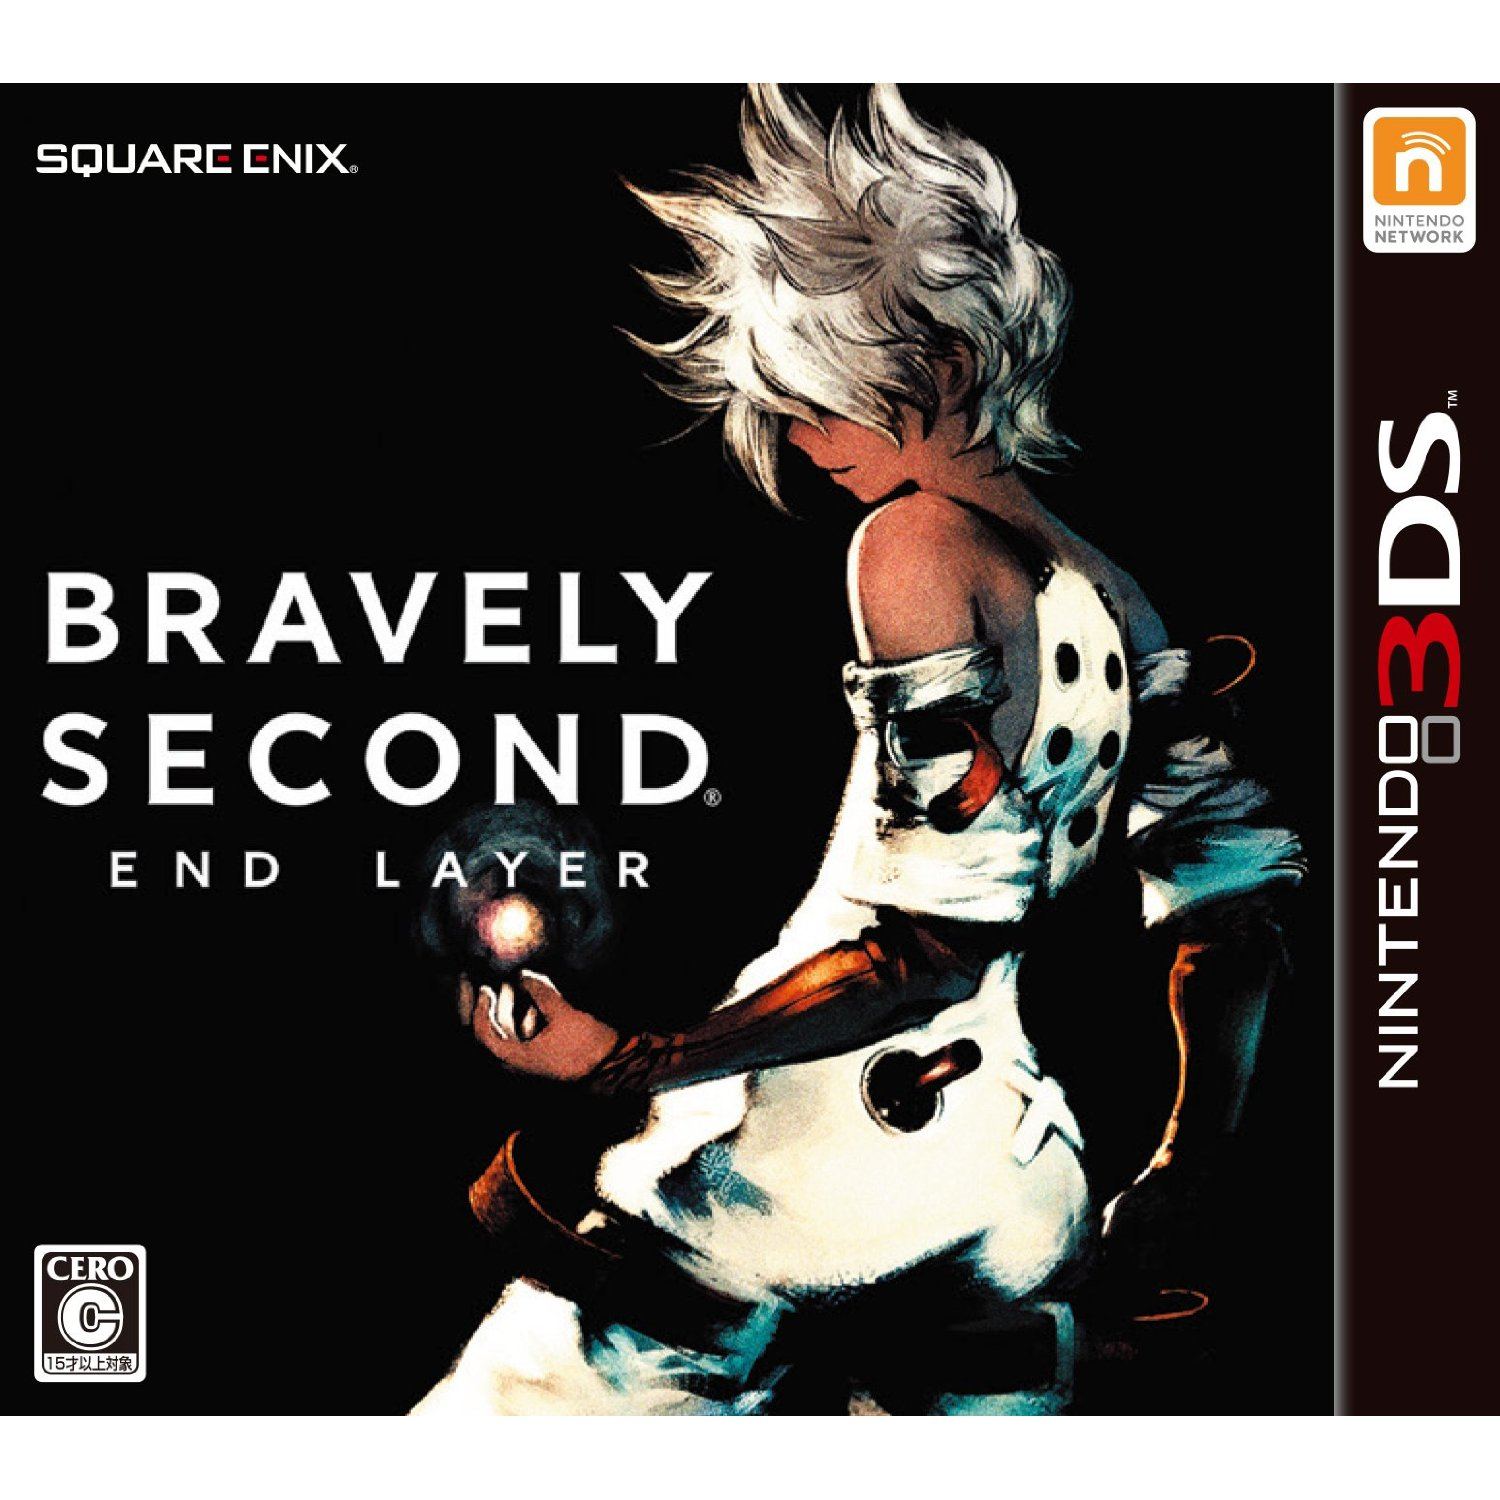 bravely-second-end-layer-343809.11.jpg